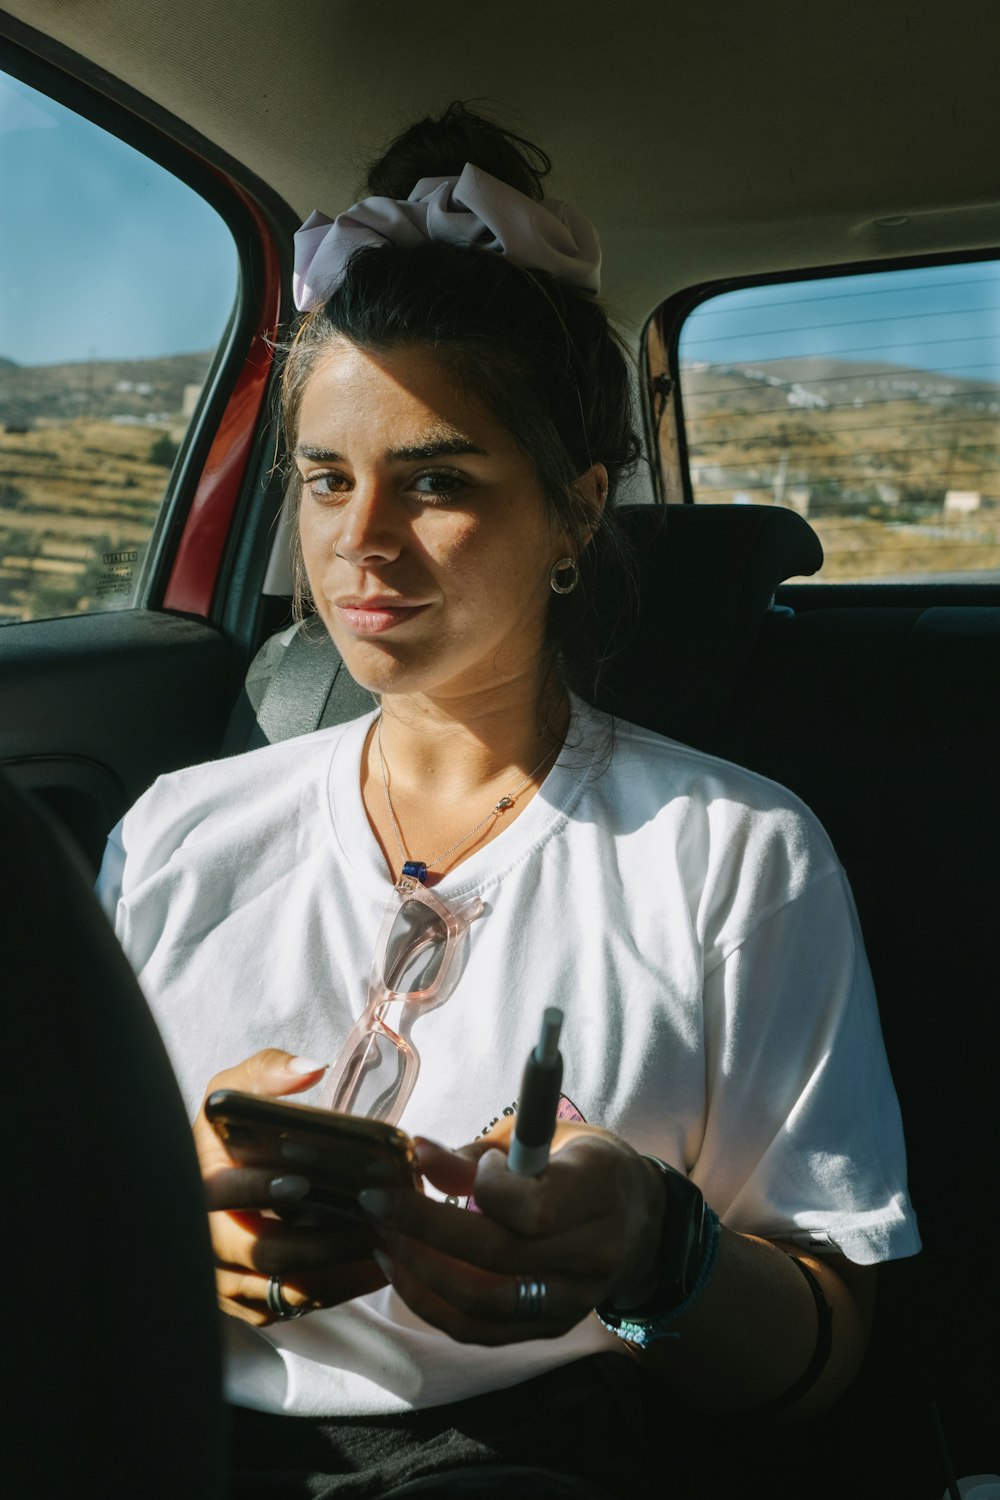 woman in white shirt holding smartphone